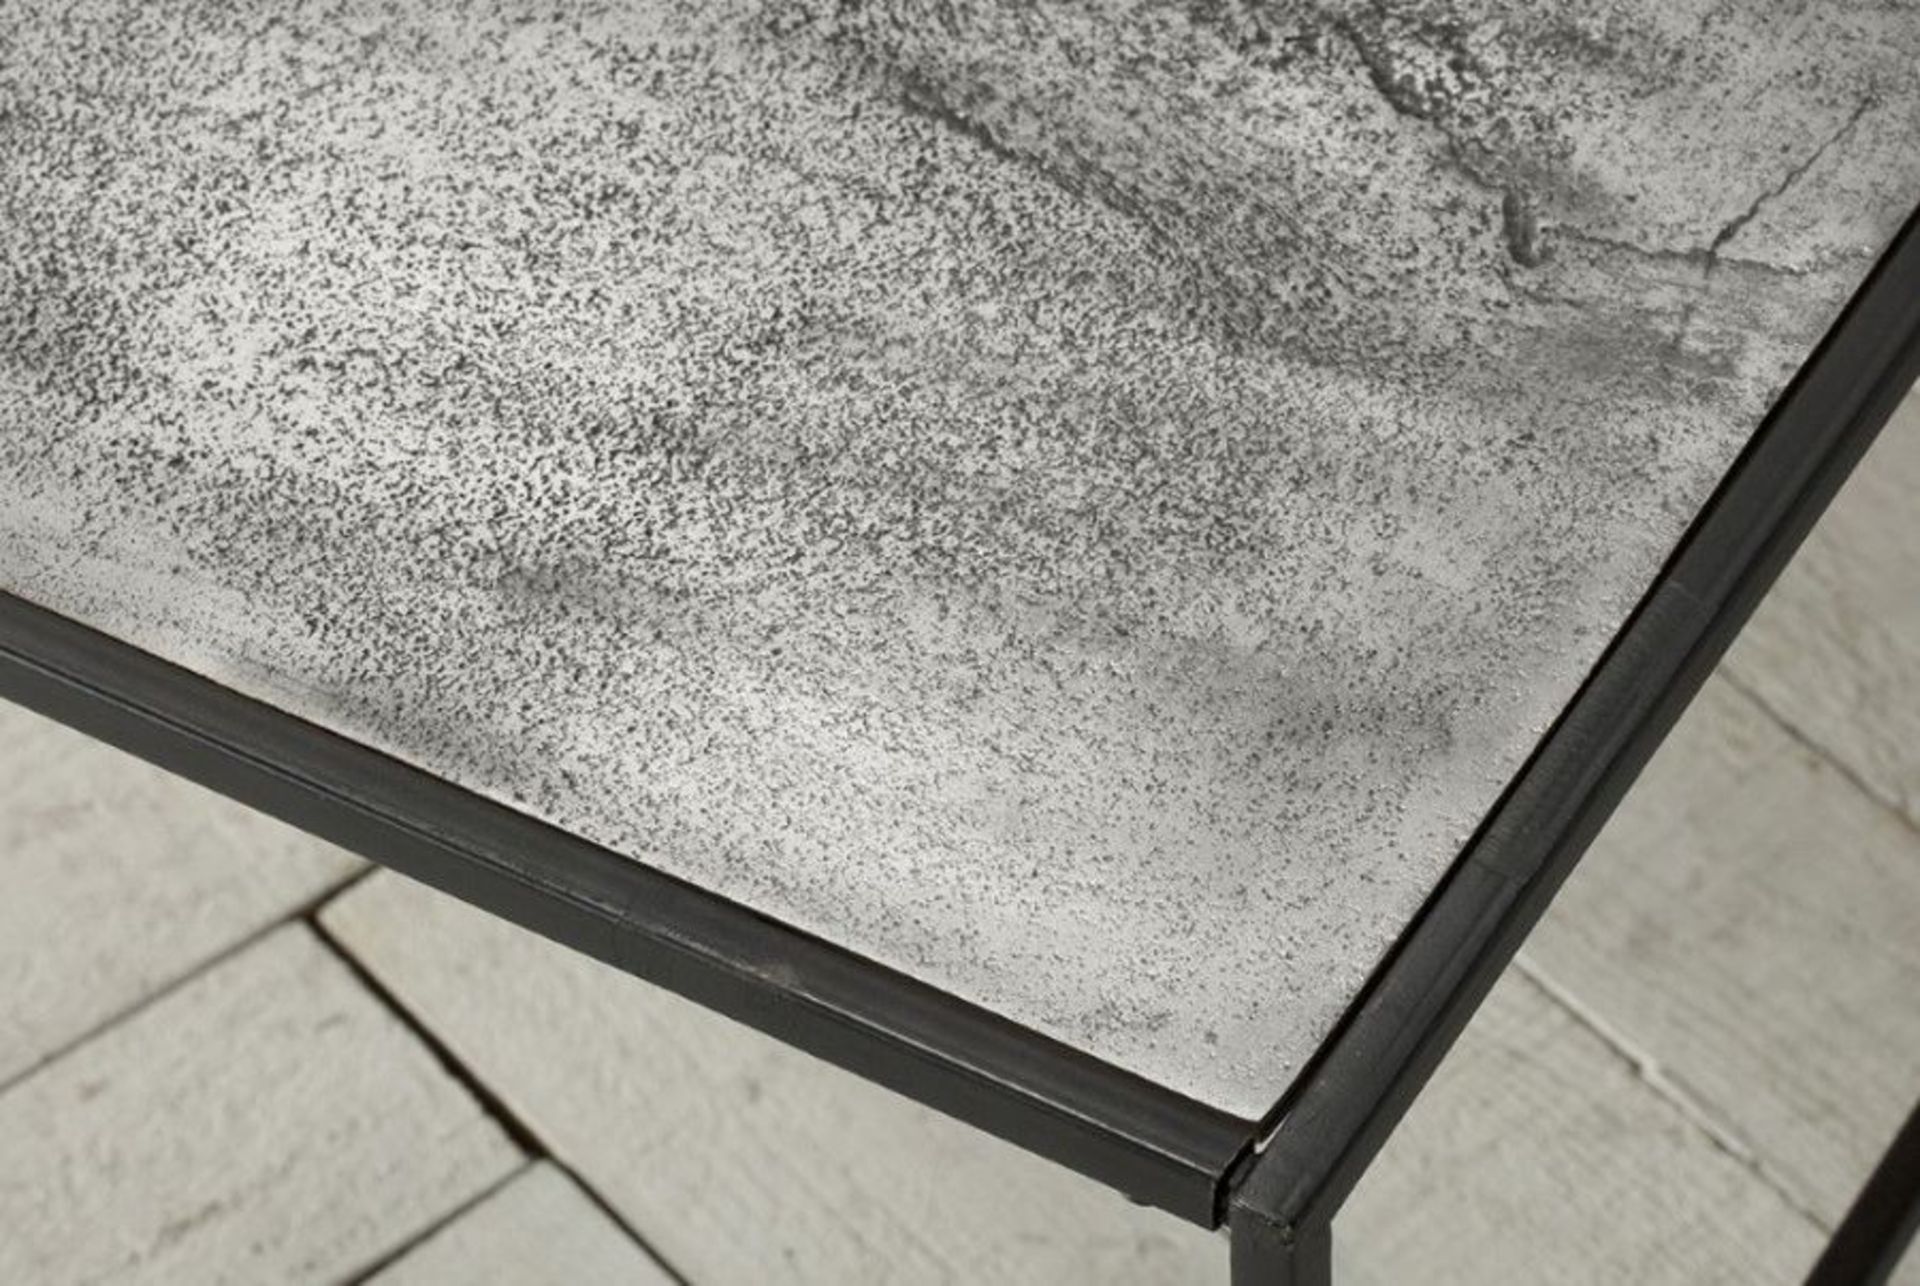 Chic and modern, the Hadston Coffee Table Antique Silver from Olivia's is sure to make a statement - Image 4 of 4